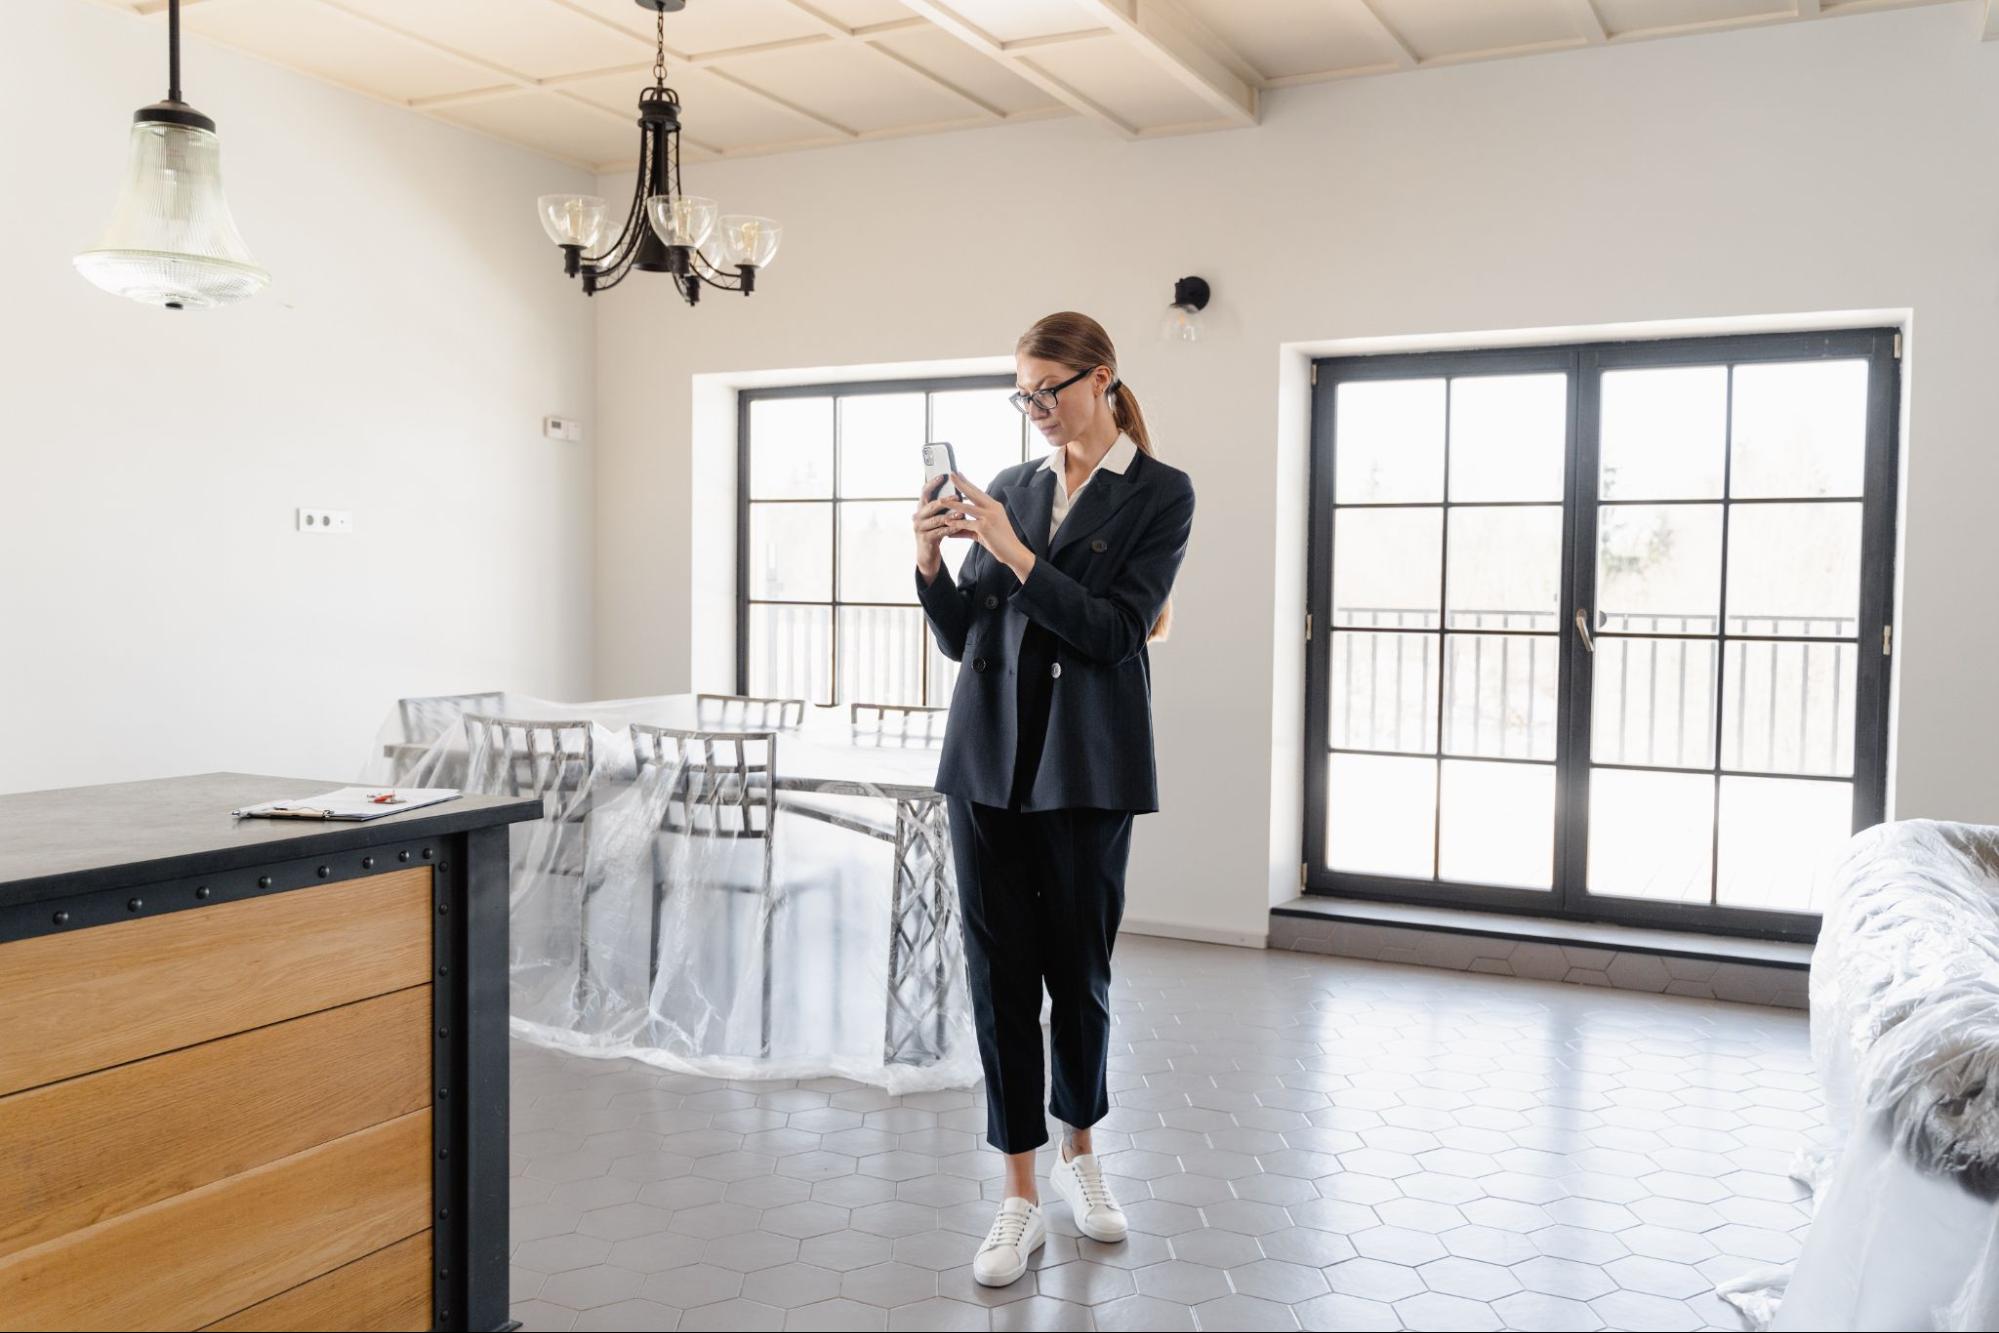 Metaverse in Real Estate: How House Tours are Changing